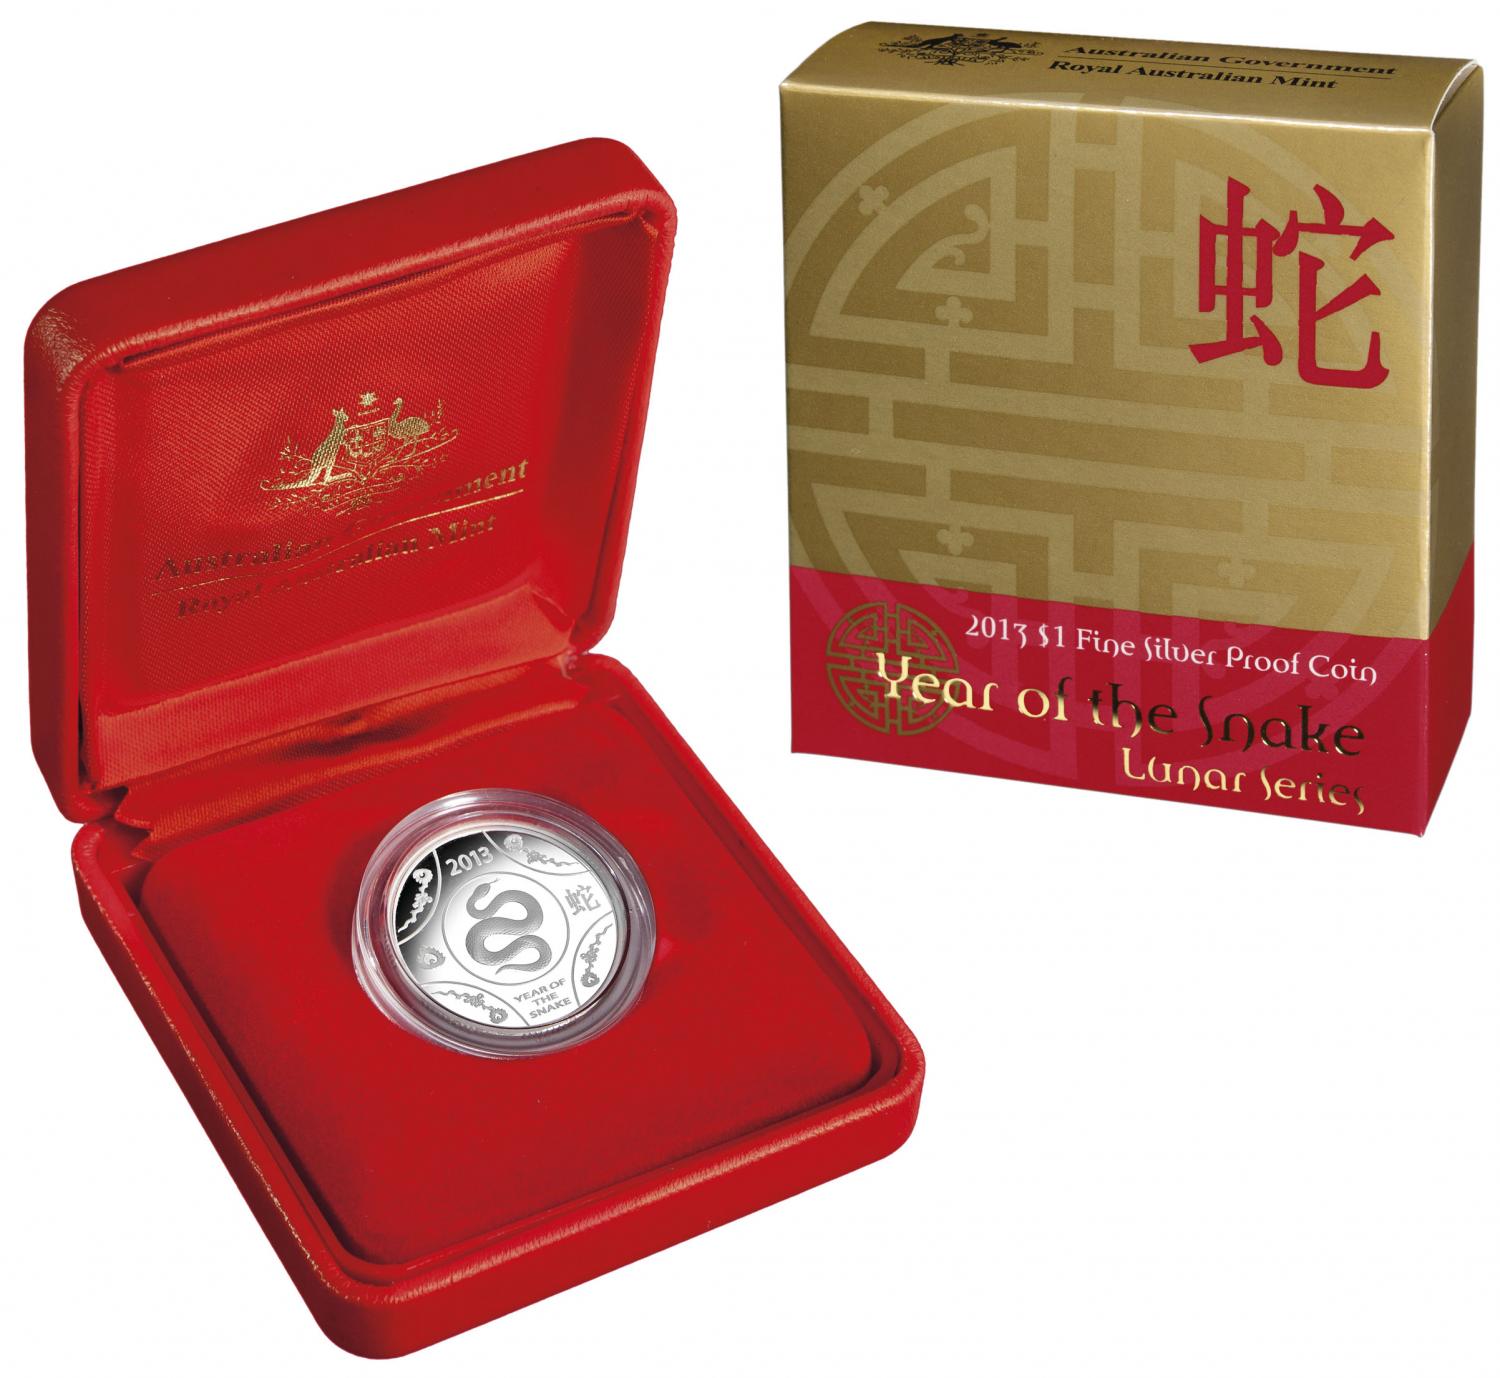 Thumbnail for 2013 Lunar Series - Year of the Snake $1 Silver Proof Coin